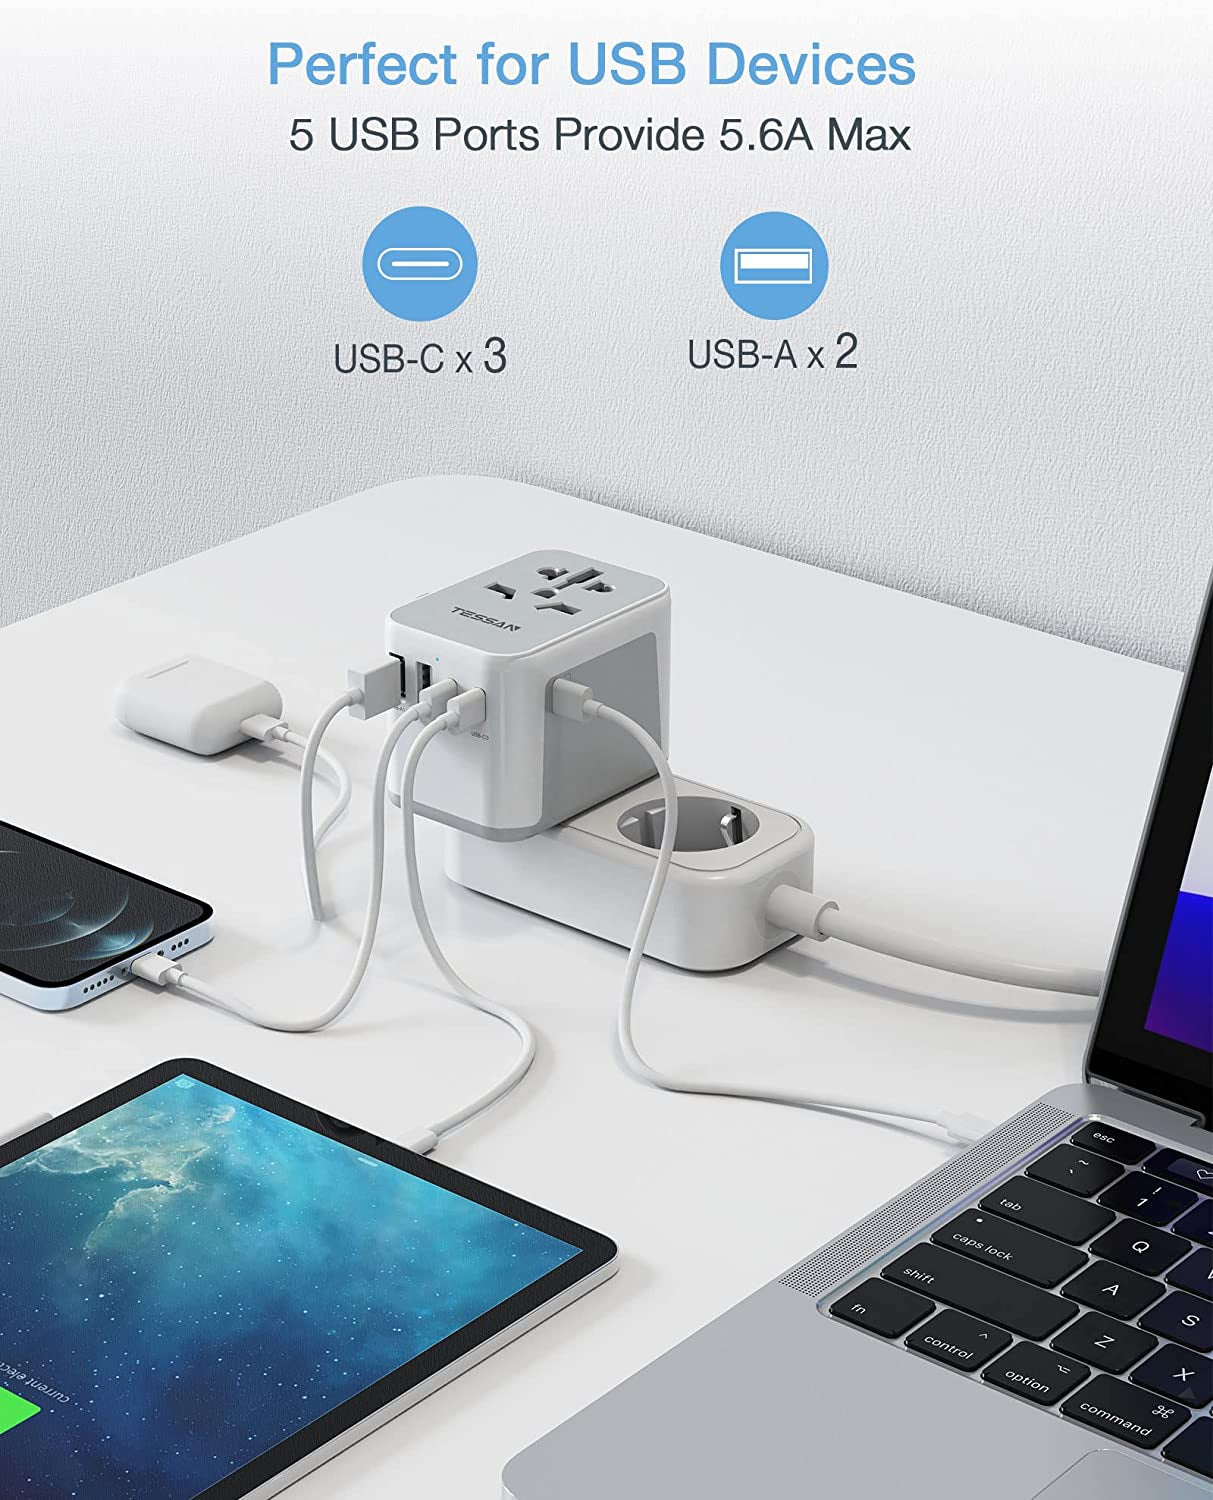 All-In-One Universal Travel Adapter with Multiple Ports and USB Charging Capability for Worldwide Use